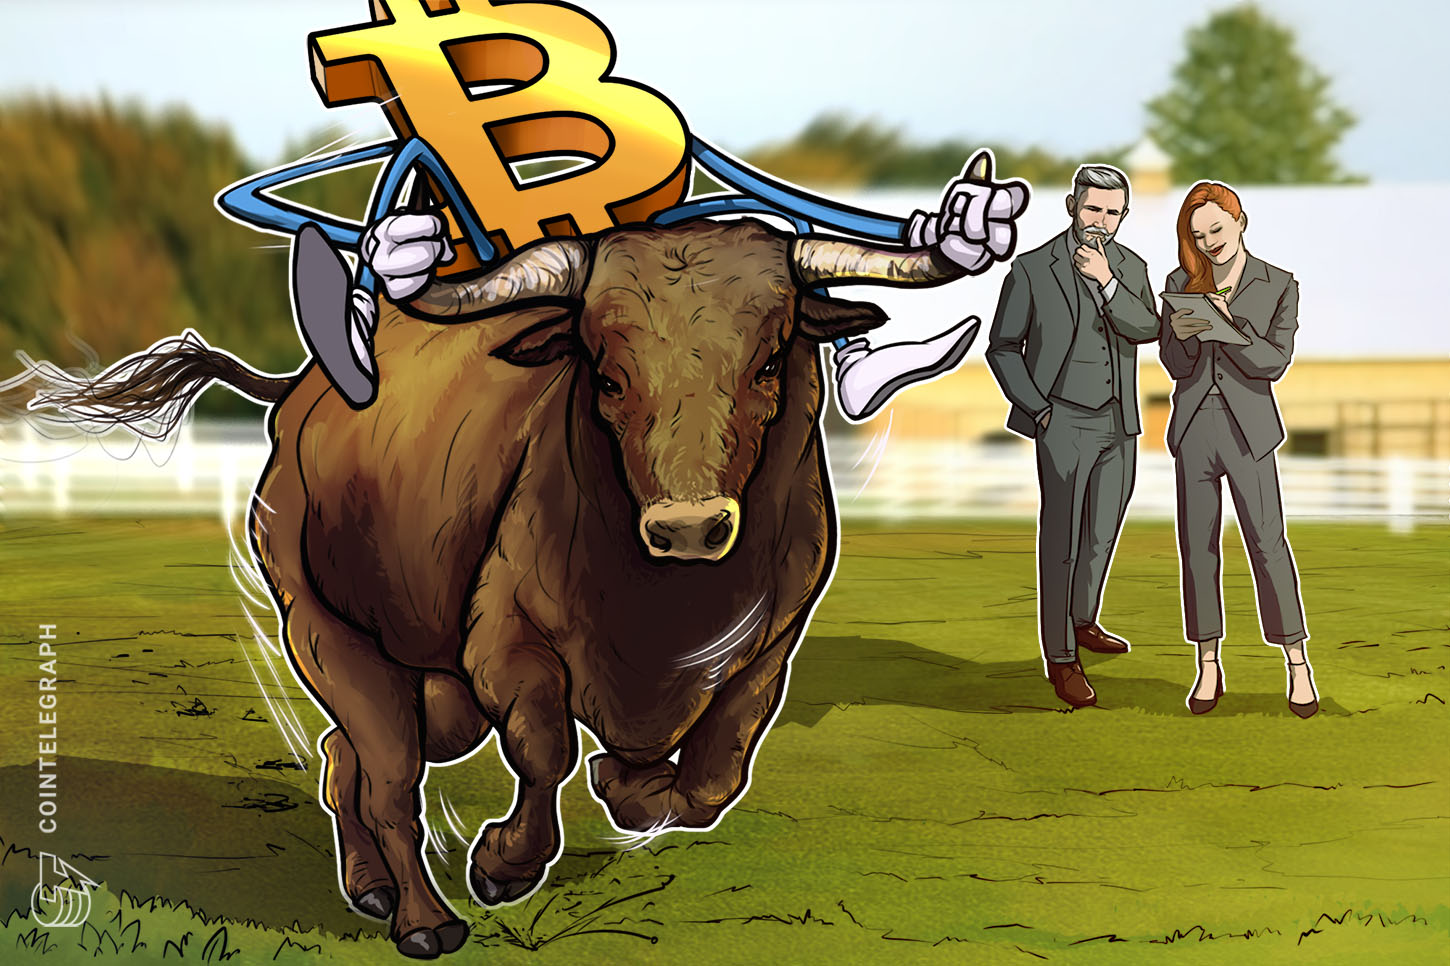 This Trade Crashed Bitcoin Value to $9K: Right here’s Why That’s Bullish